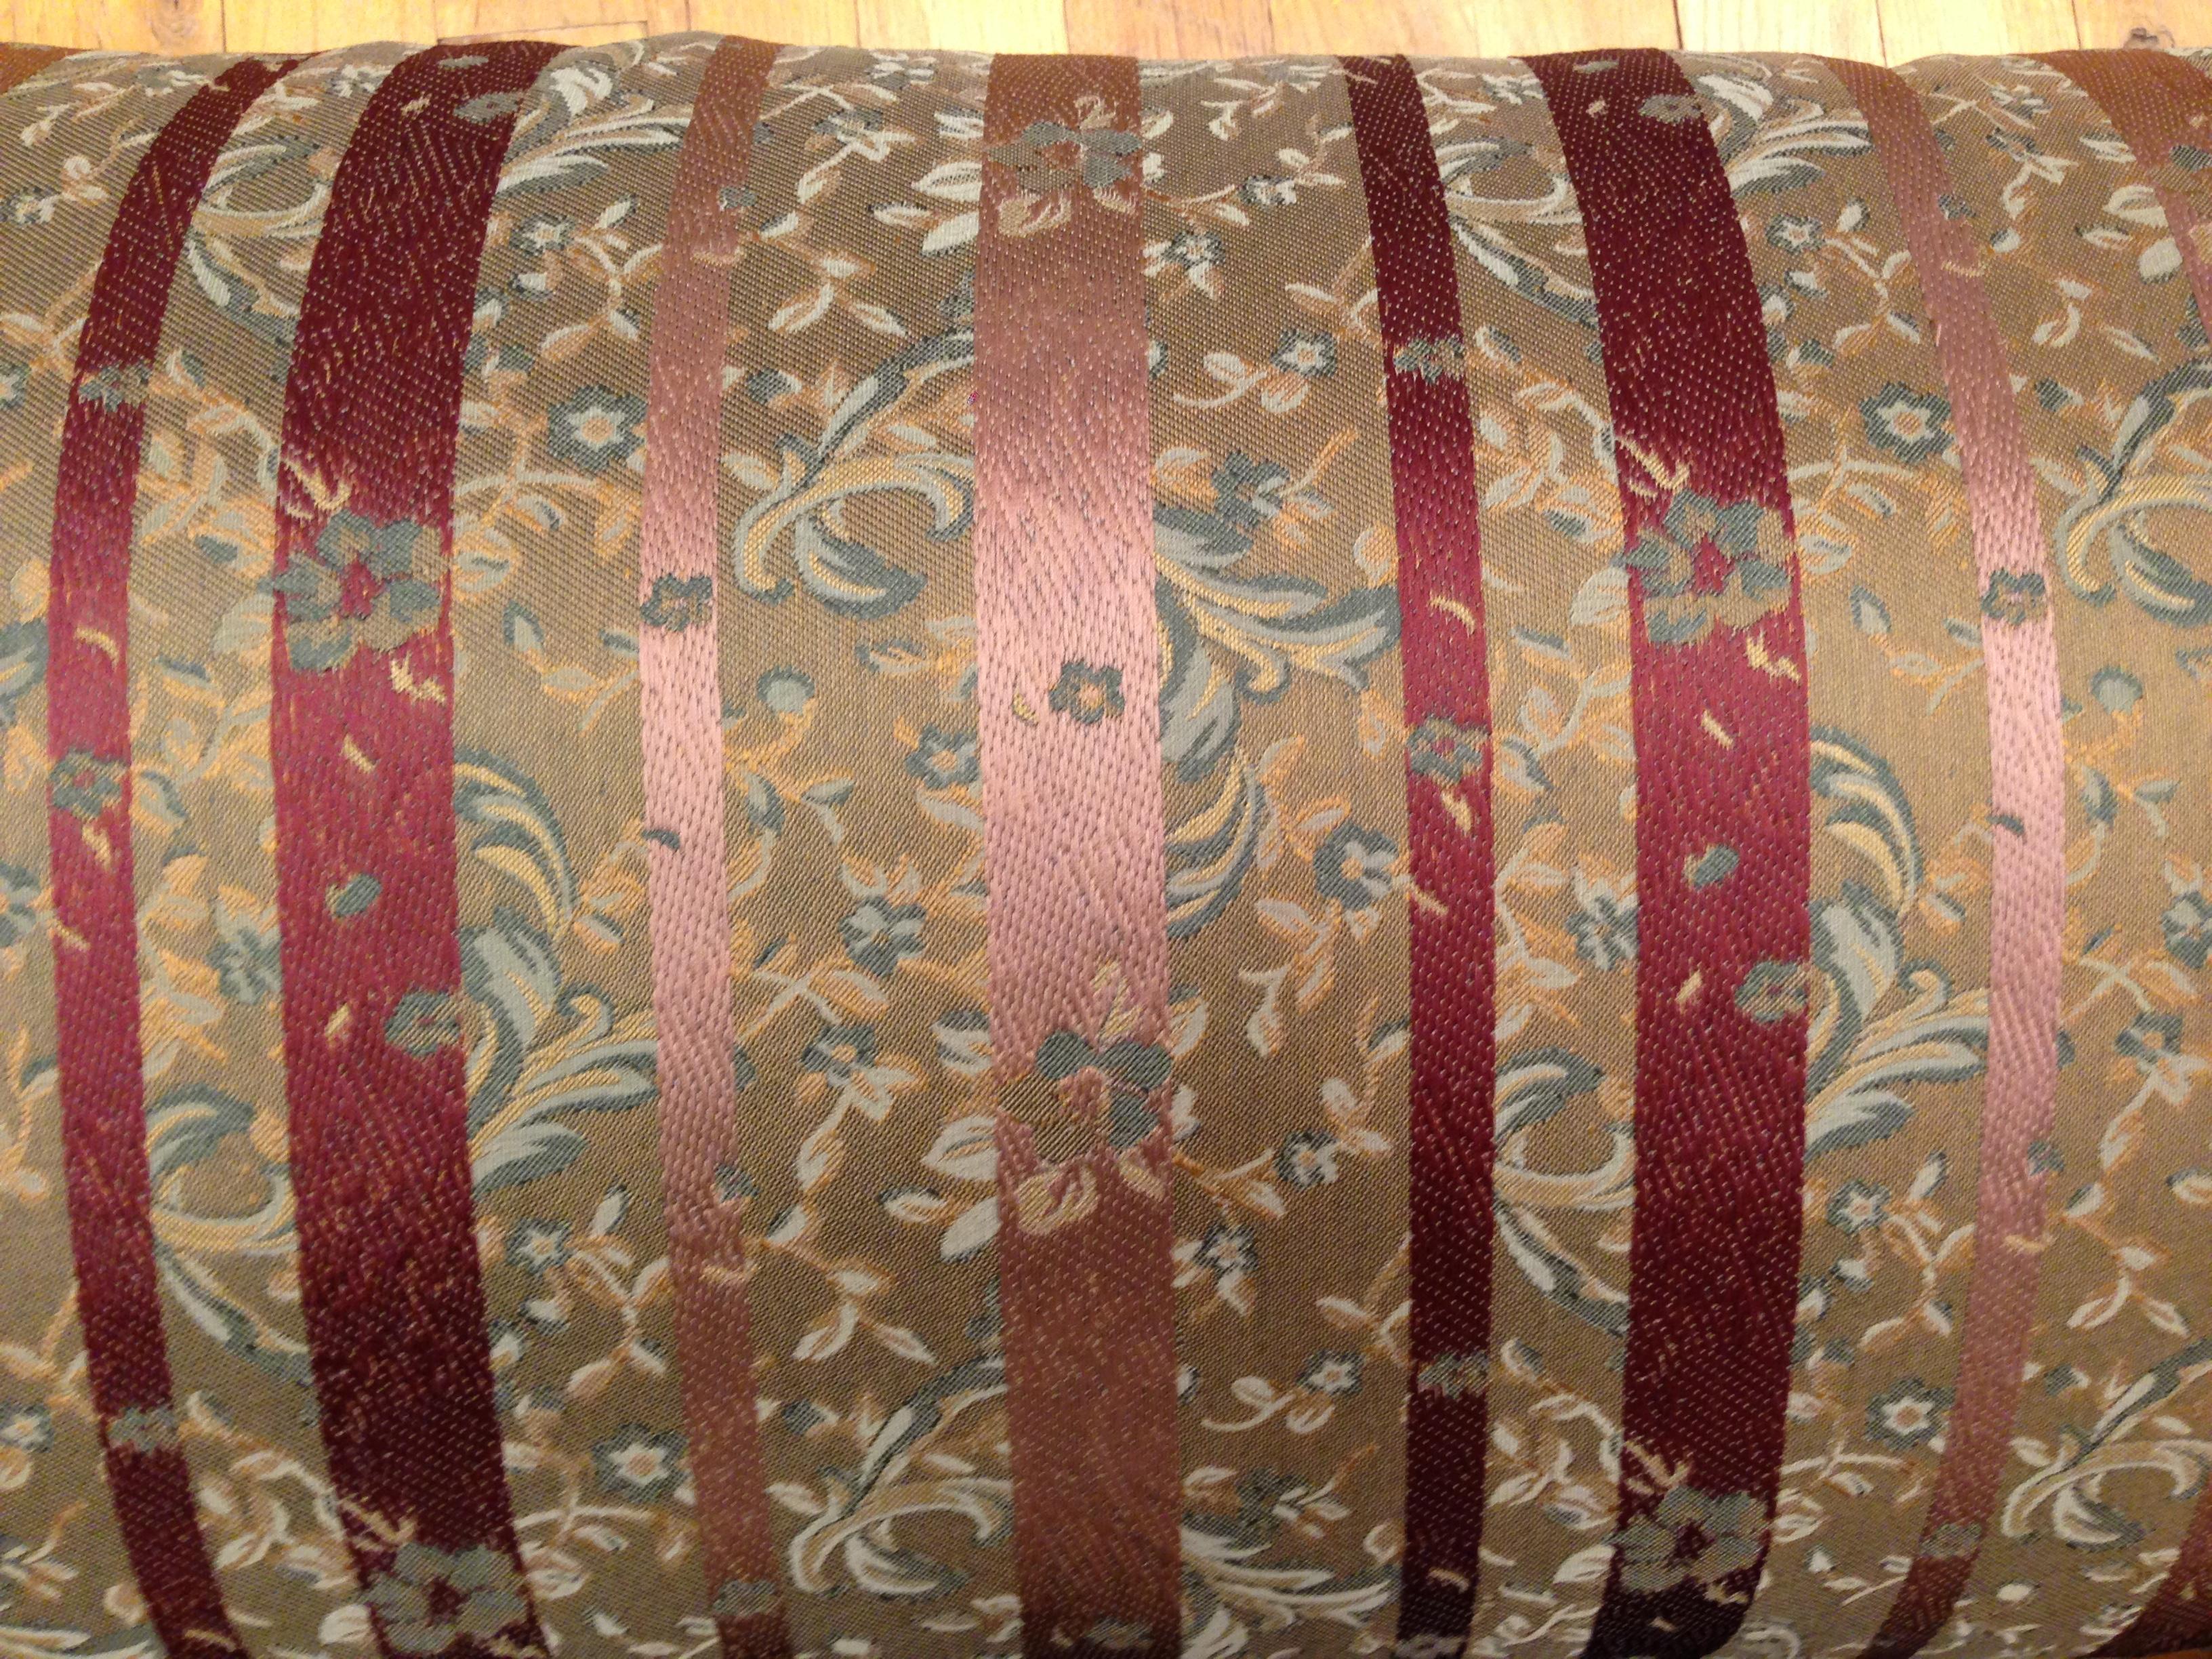 Pair of Large Decorative Satin Pillows w/ Vintage Striped Brocade on Both Sides For Sale 4